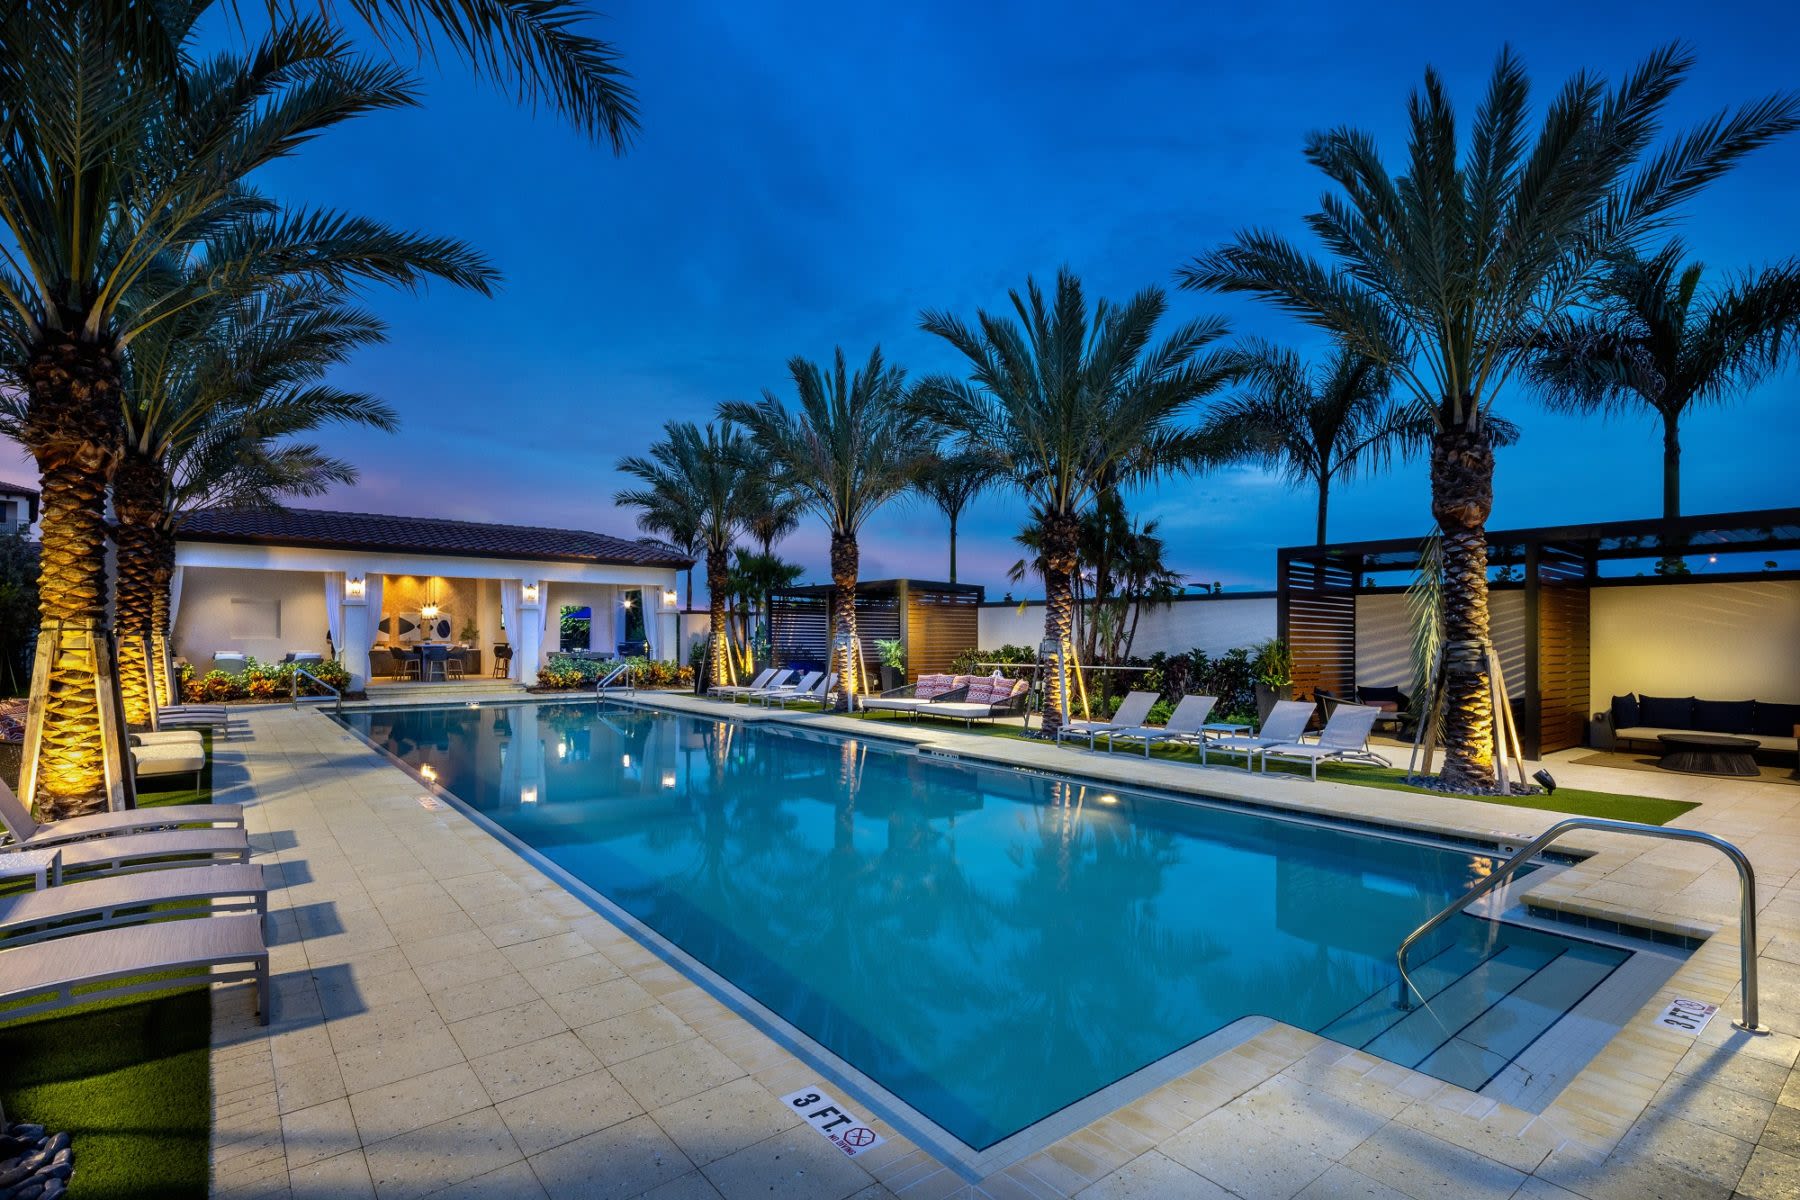 Palm-fringed poolside with loungers, clubhouse at Locklyn West Palm, West Palm Beach, Florida